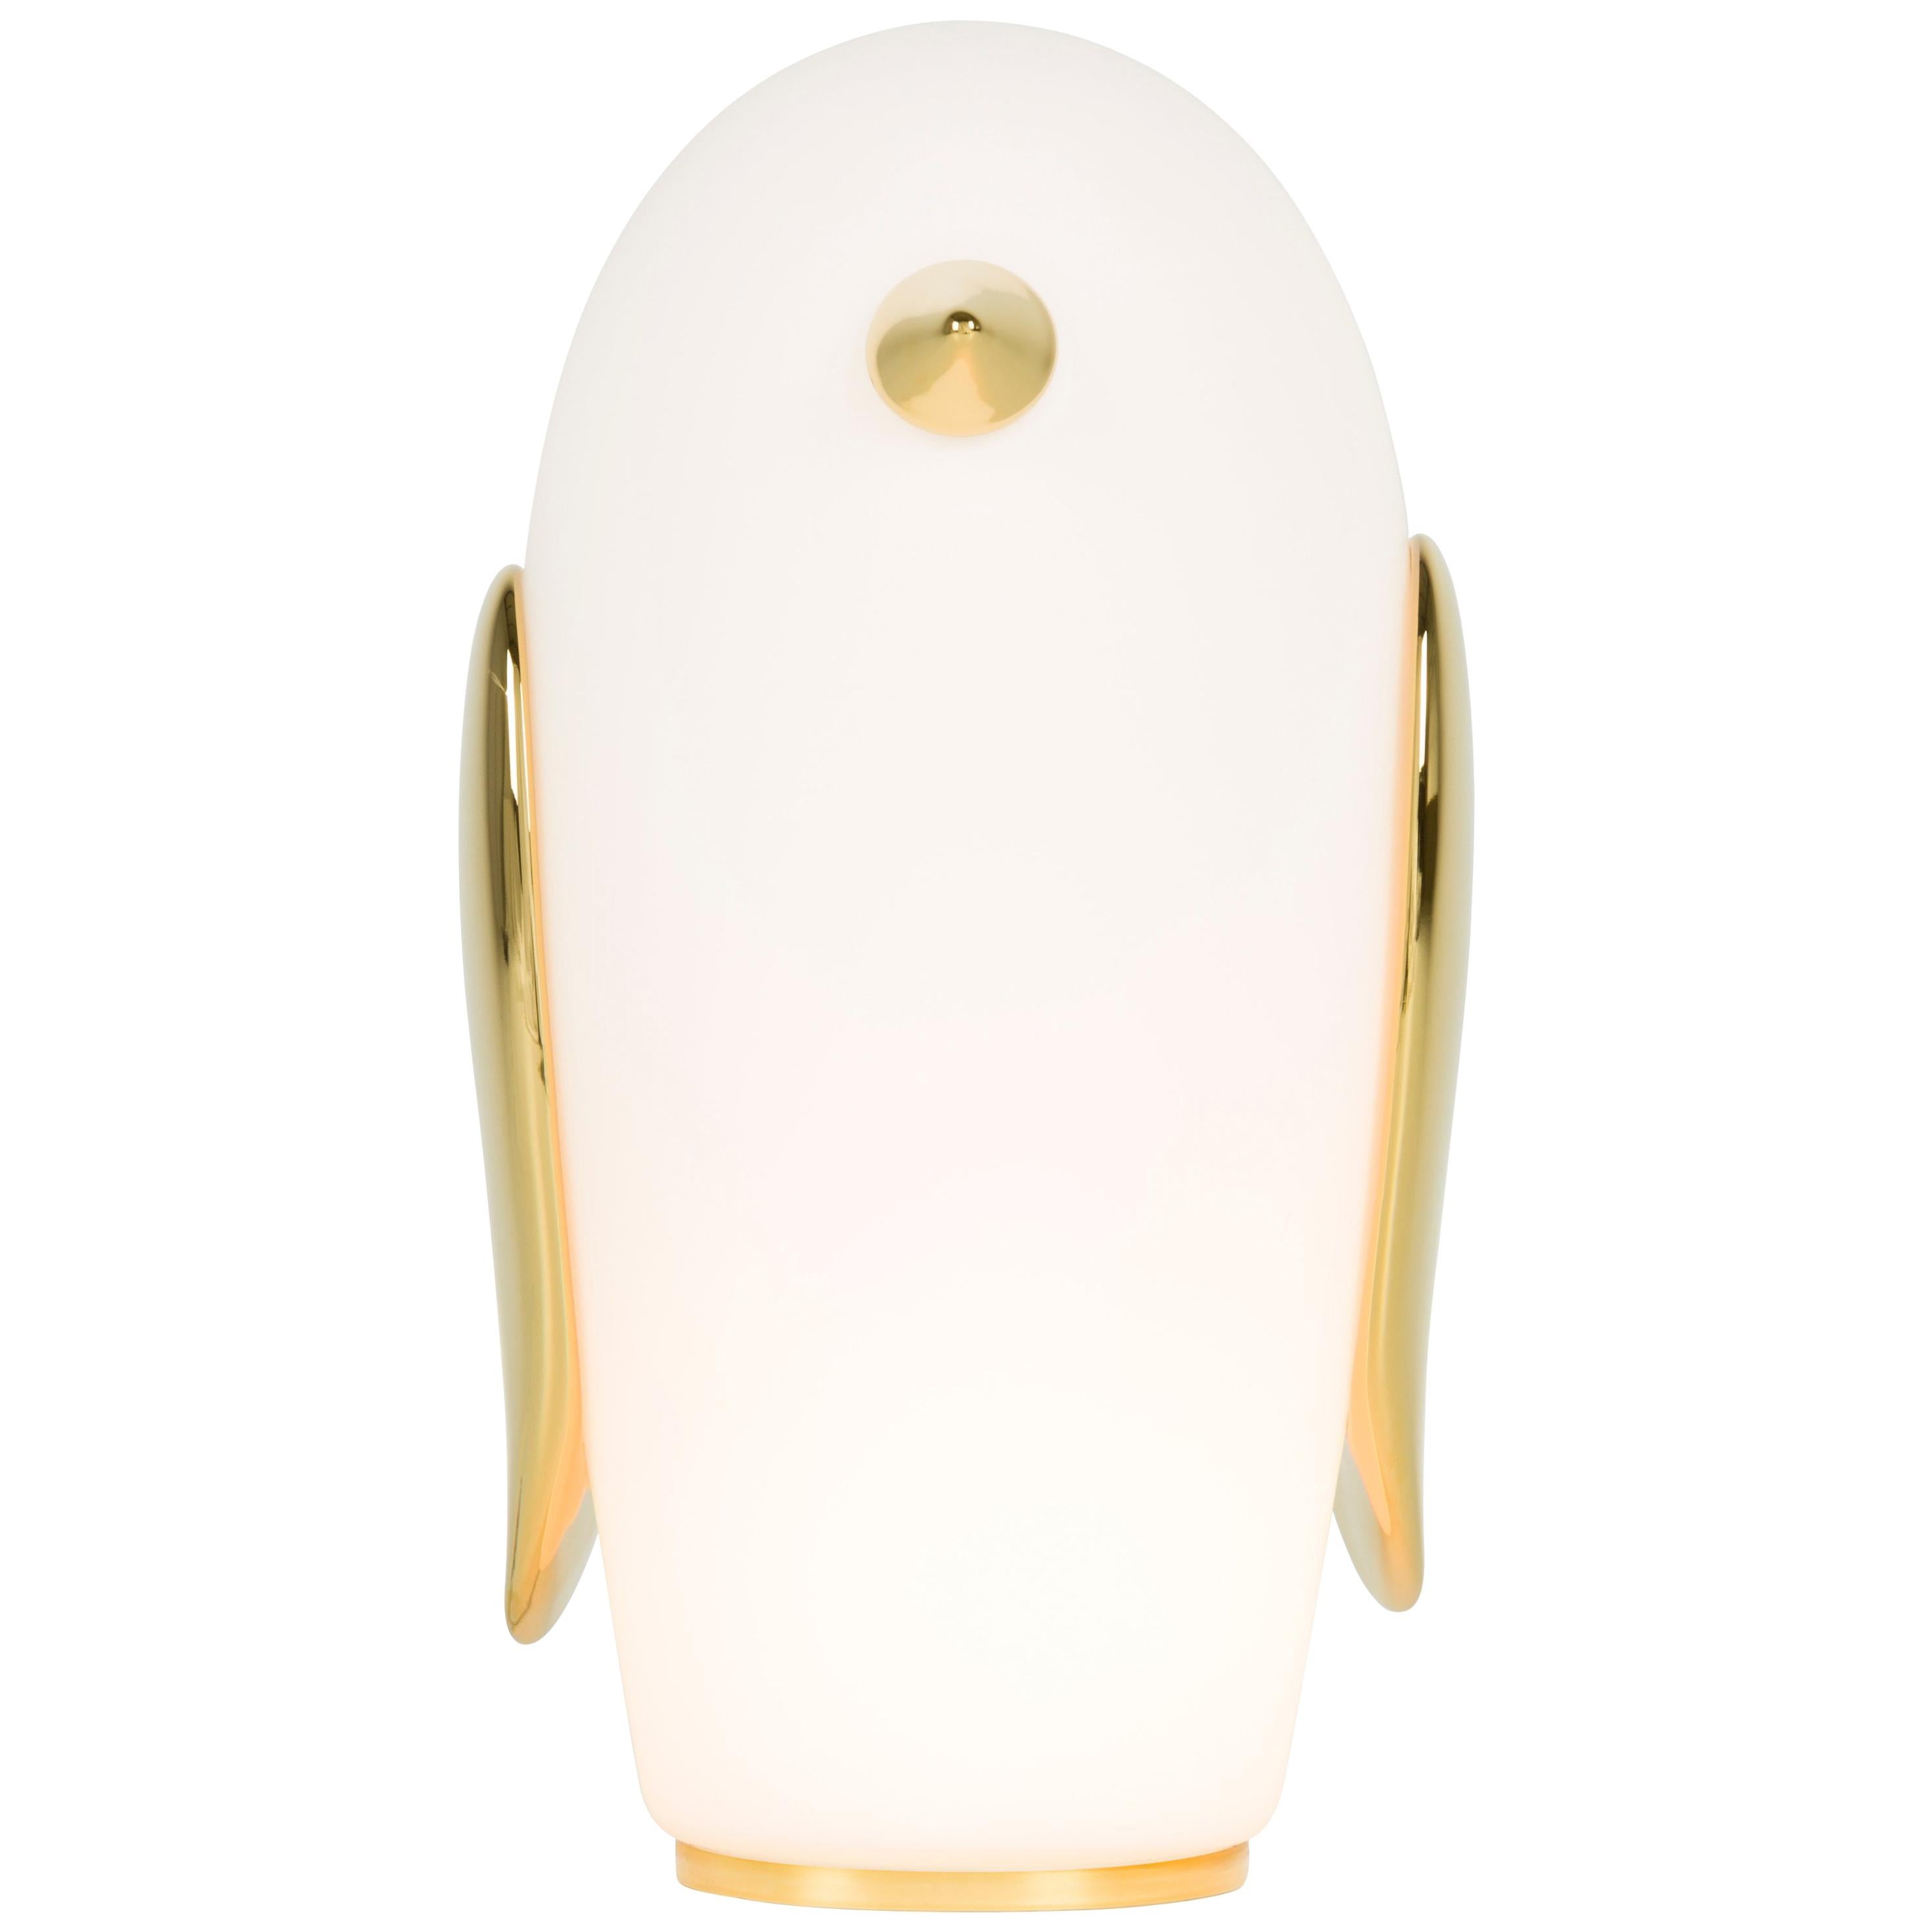 Moooi Noot Noot Table Lamp in White Opal Glass and Gold Painted Ceramic For Sale